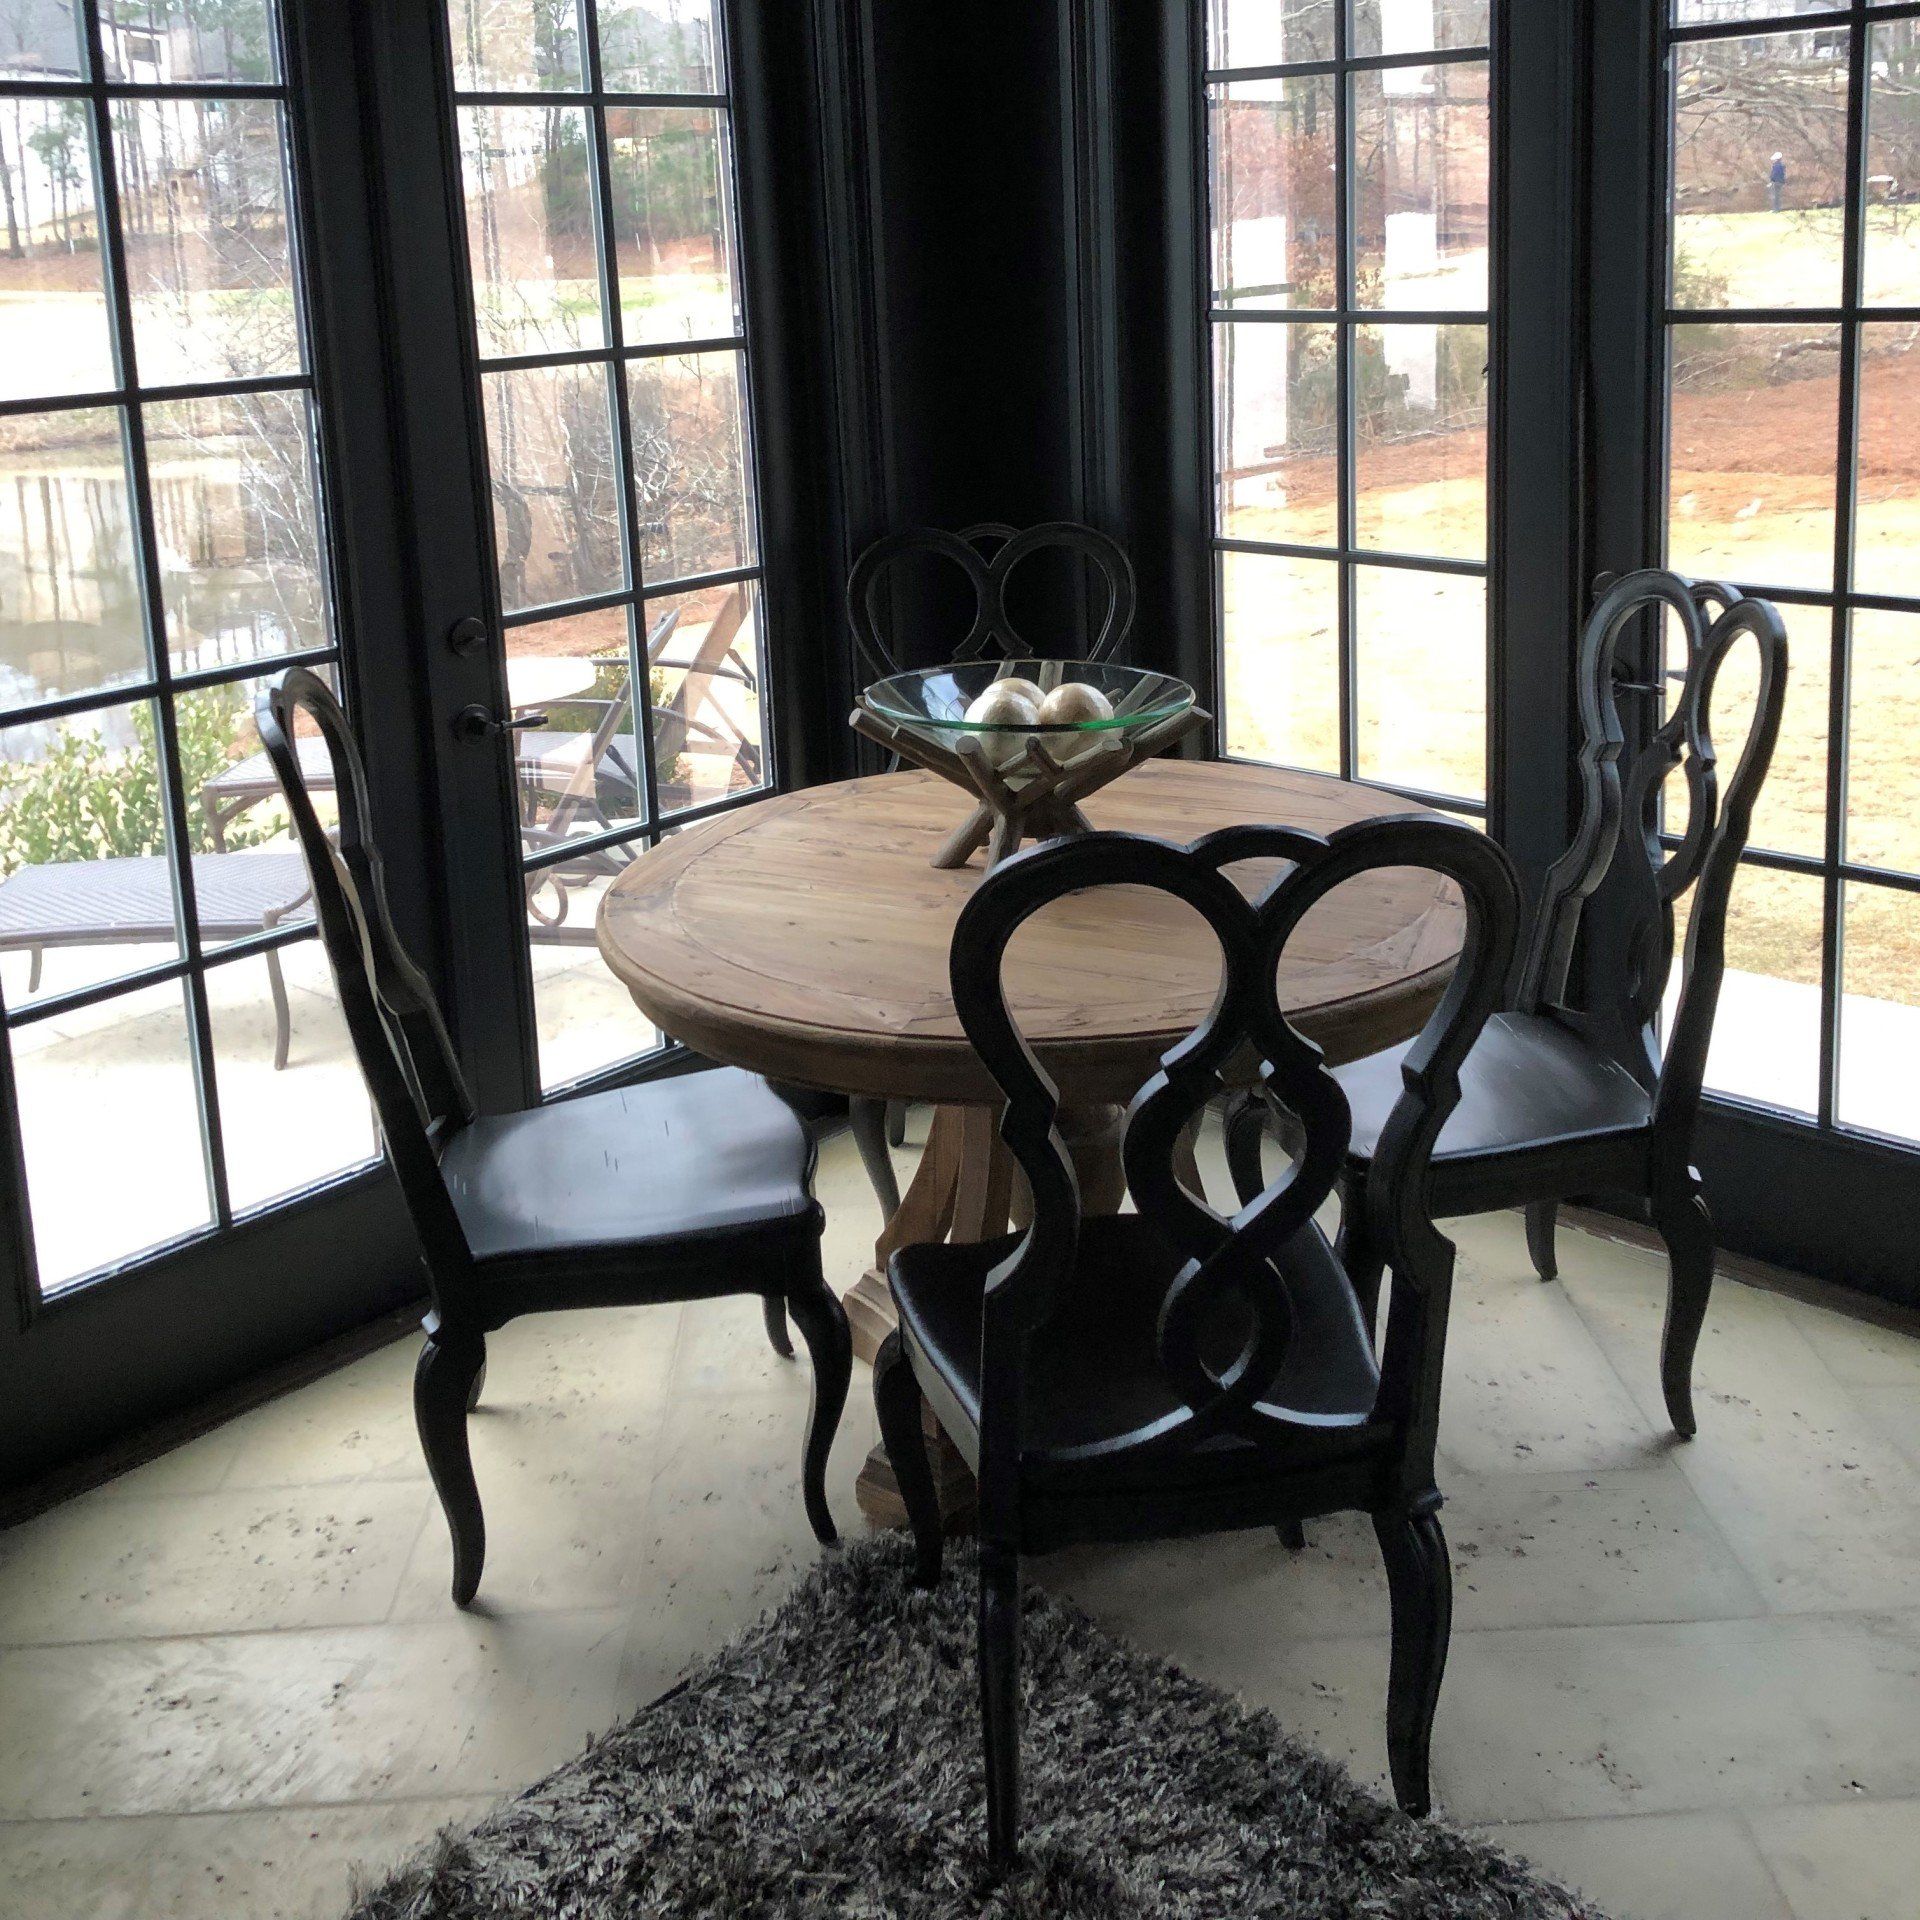 Professional home tint installation in Auburn - harmful UV blocked from floors and furniture after home tint installed in Auburn, AL